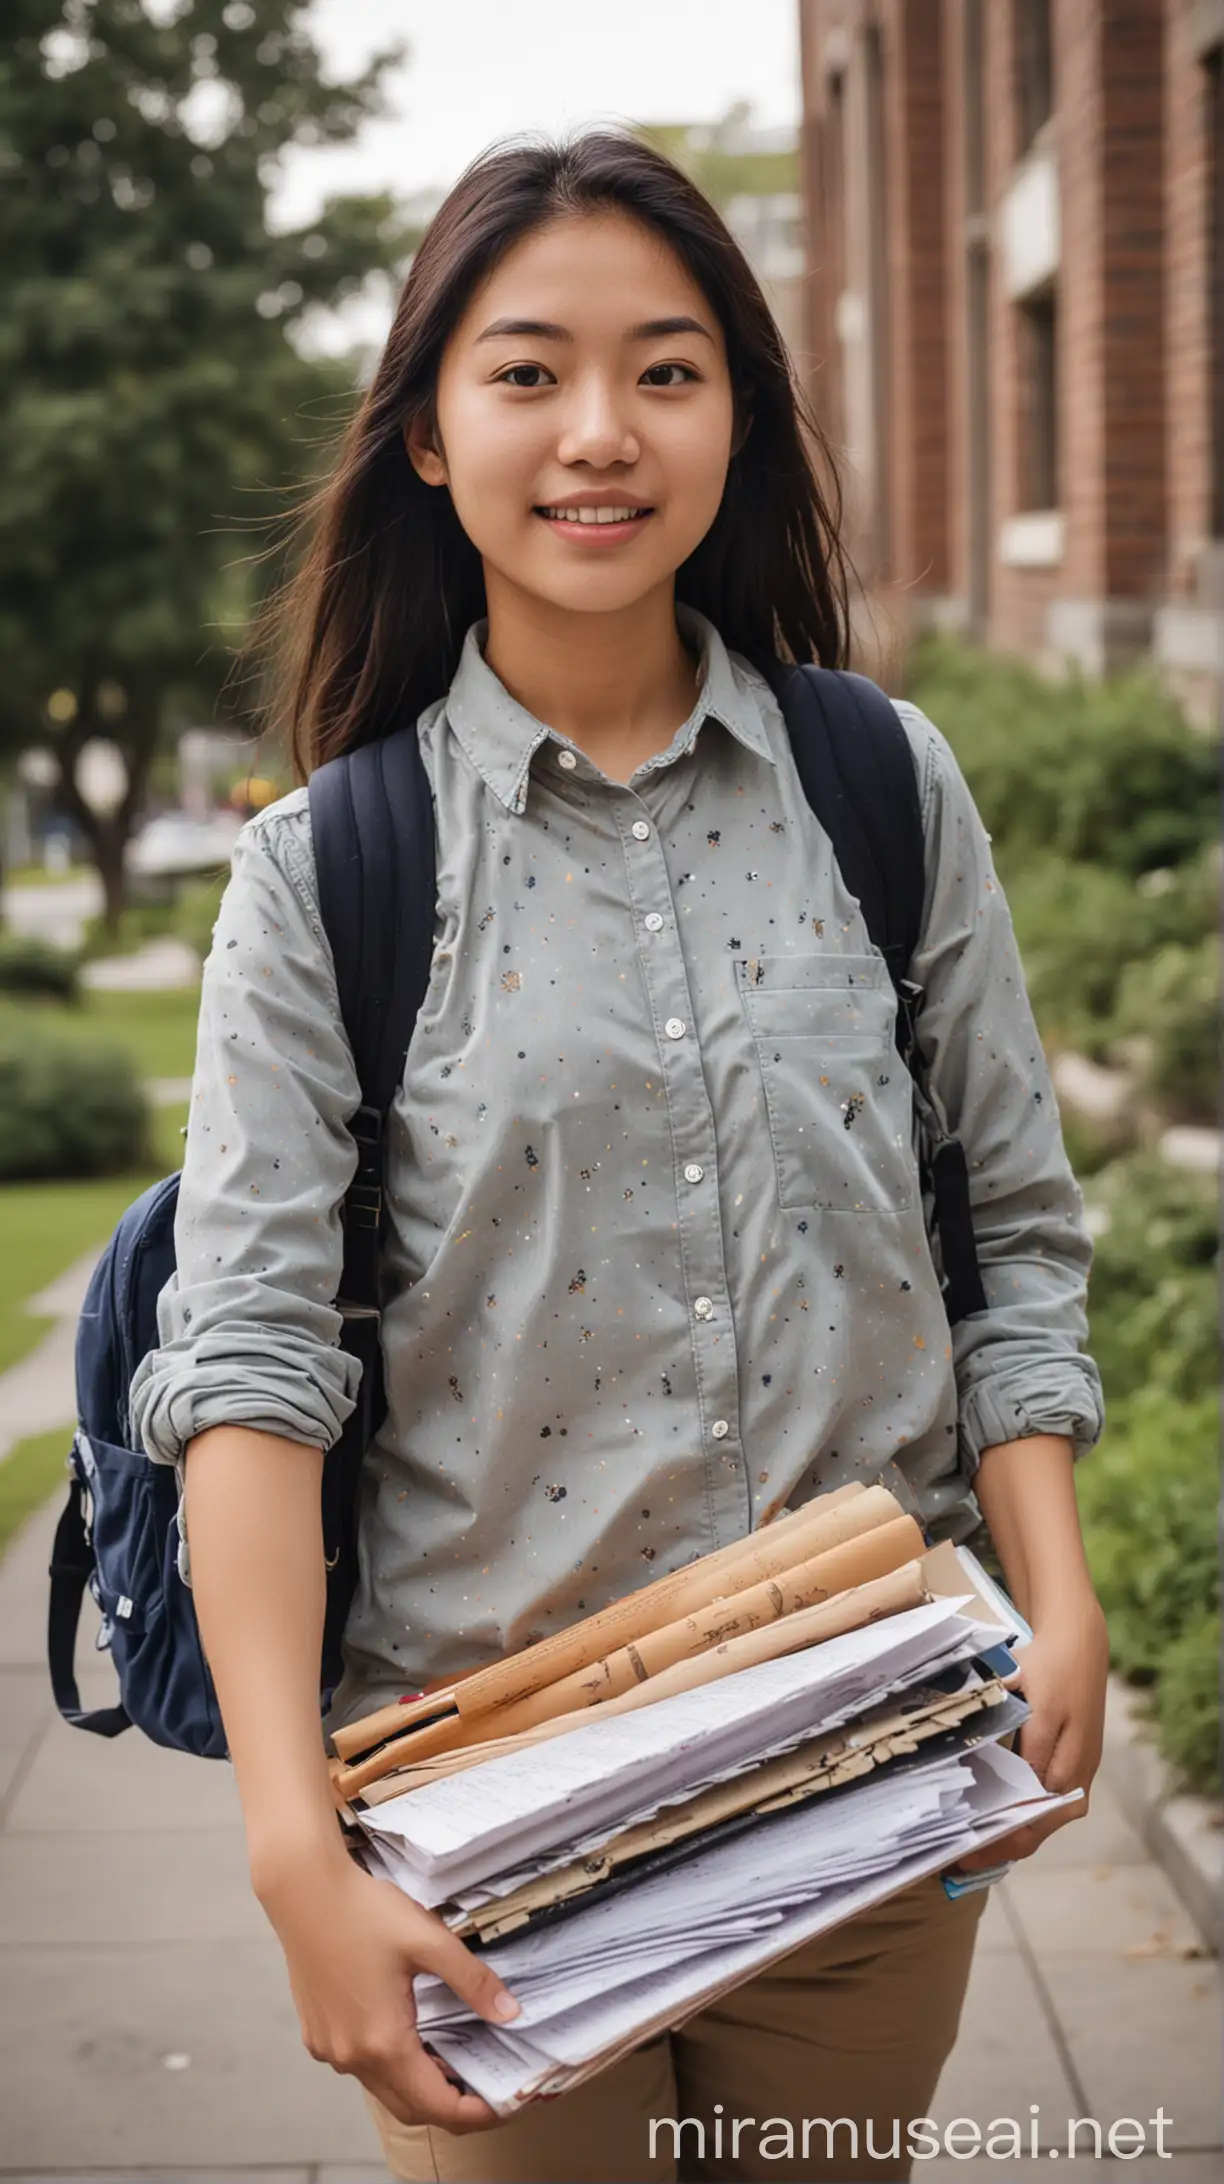 A university student. She is Asian/Latin American and taking astronomy. She is carrying her study materials.